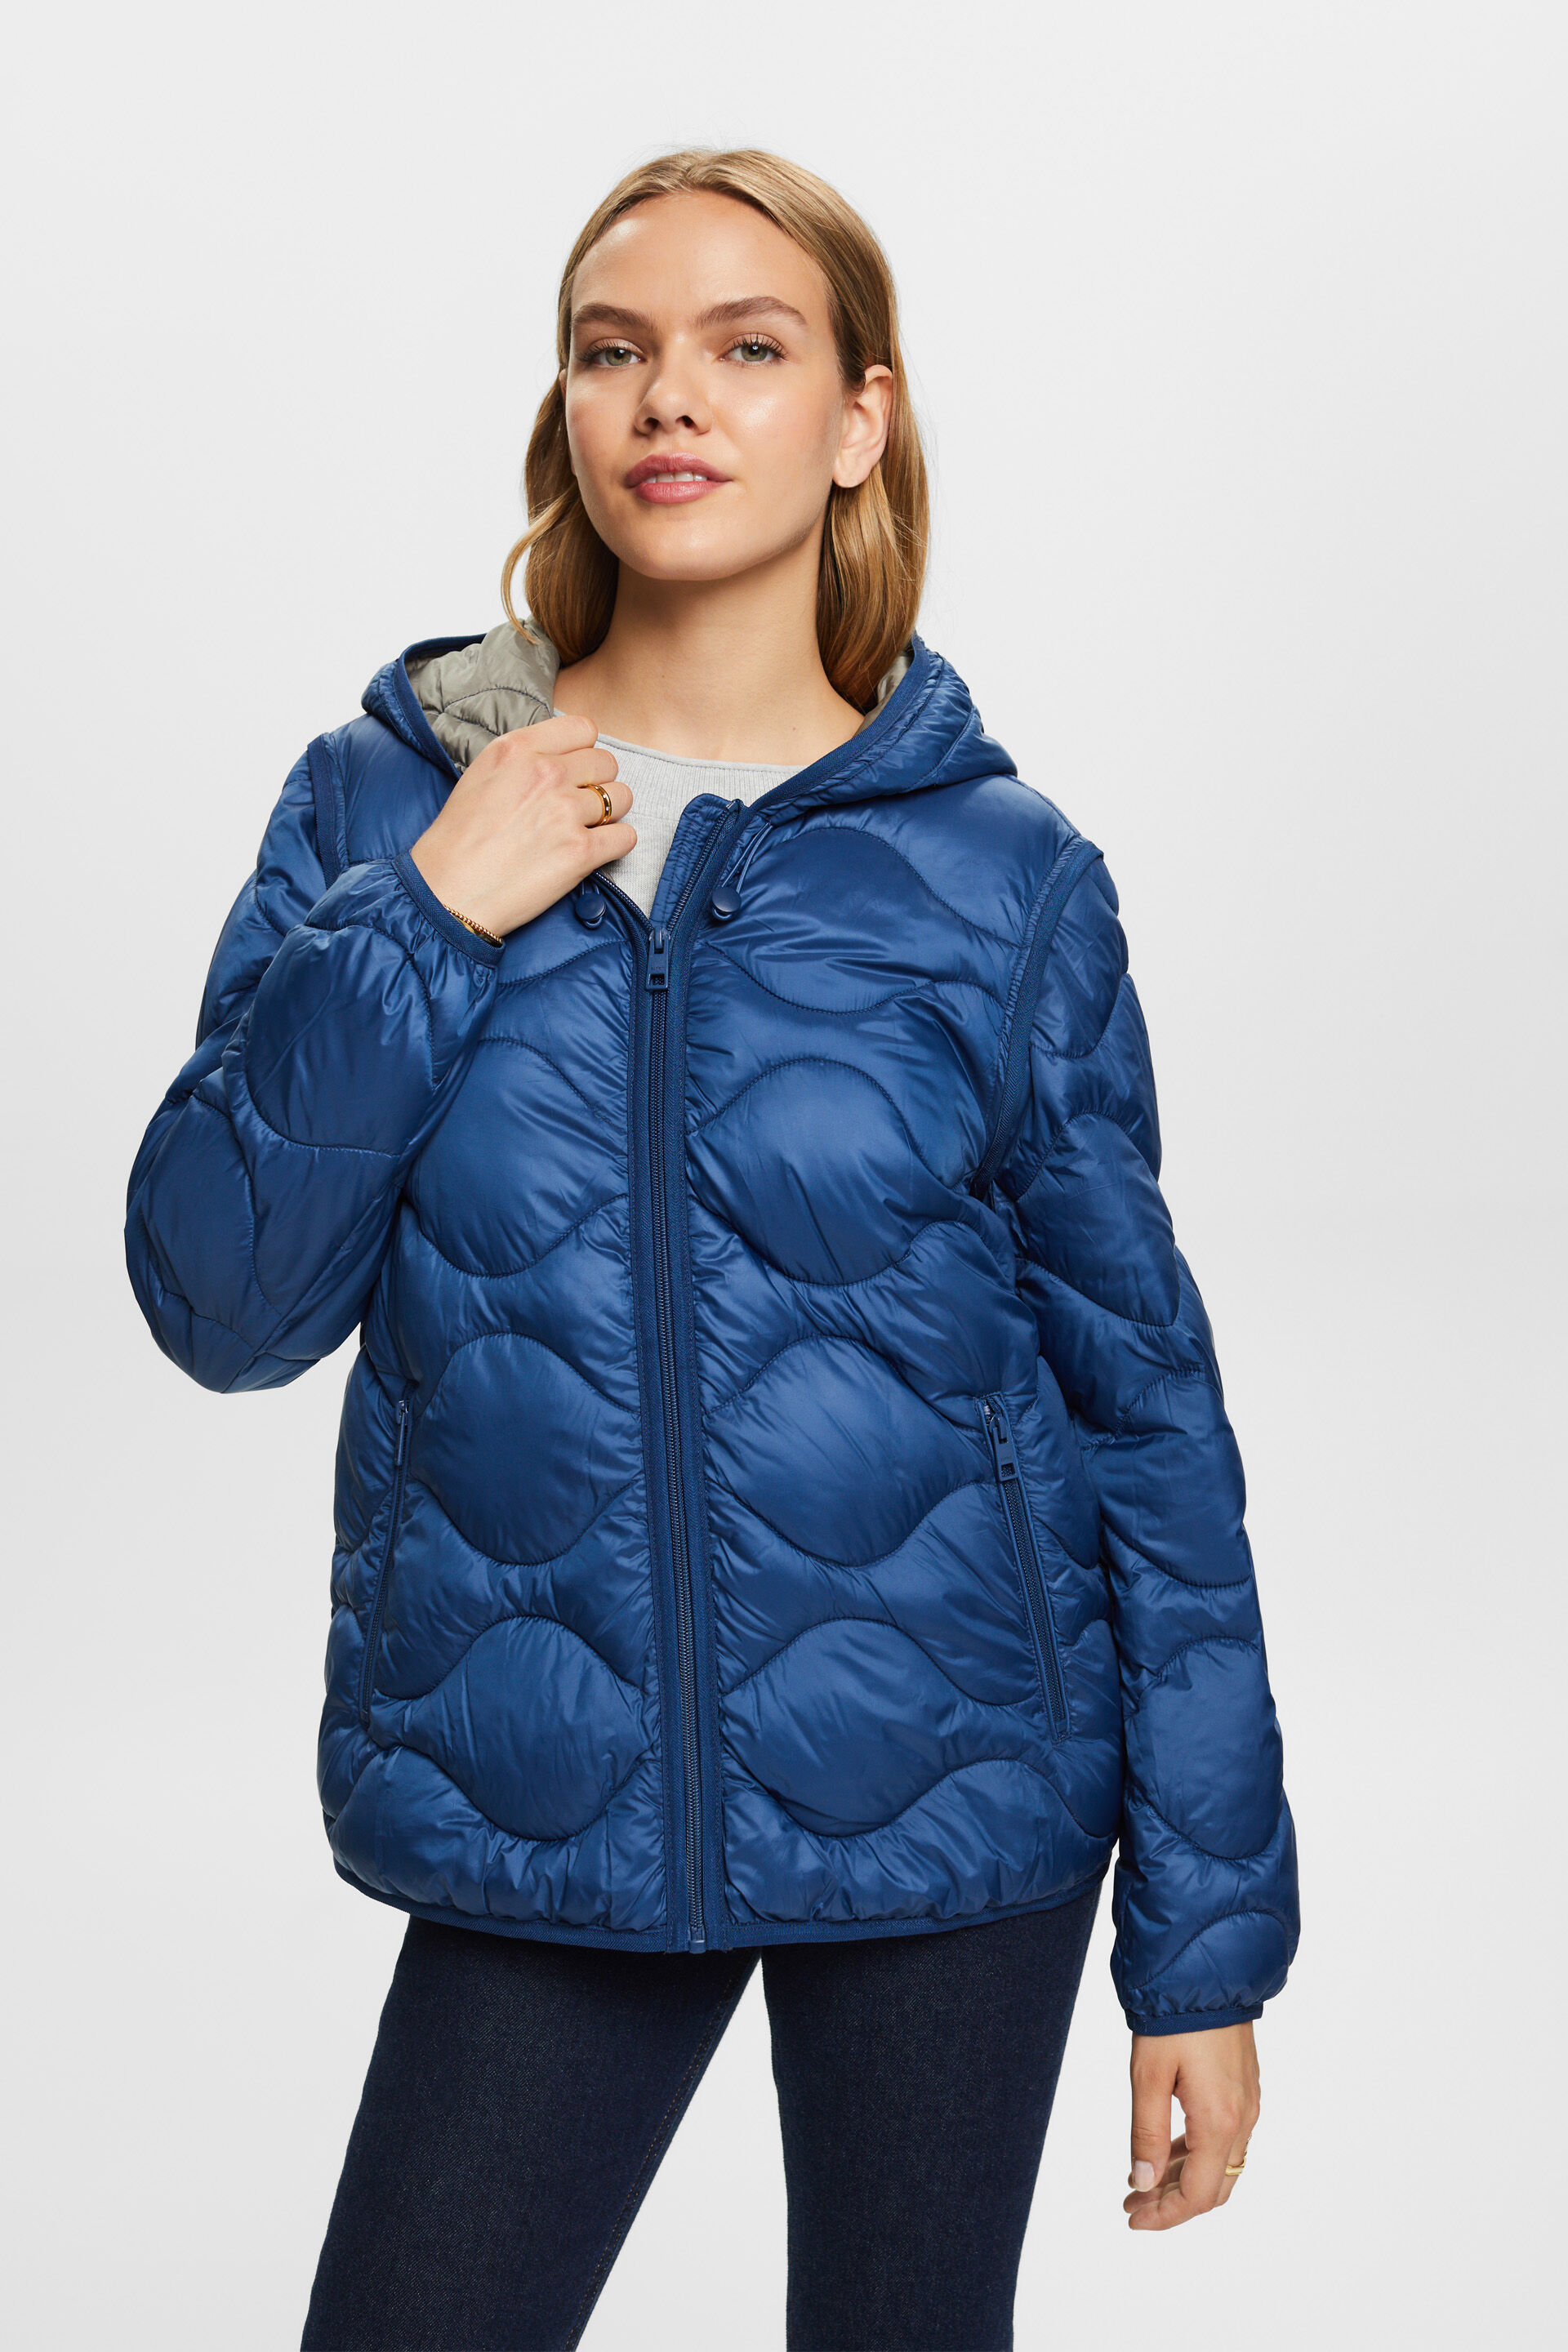 Esprit quilted transformer jacket and hooded Recycled: